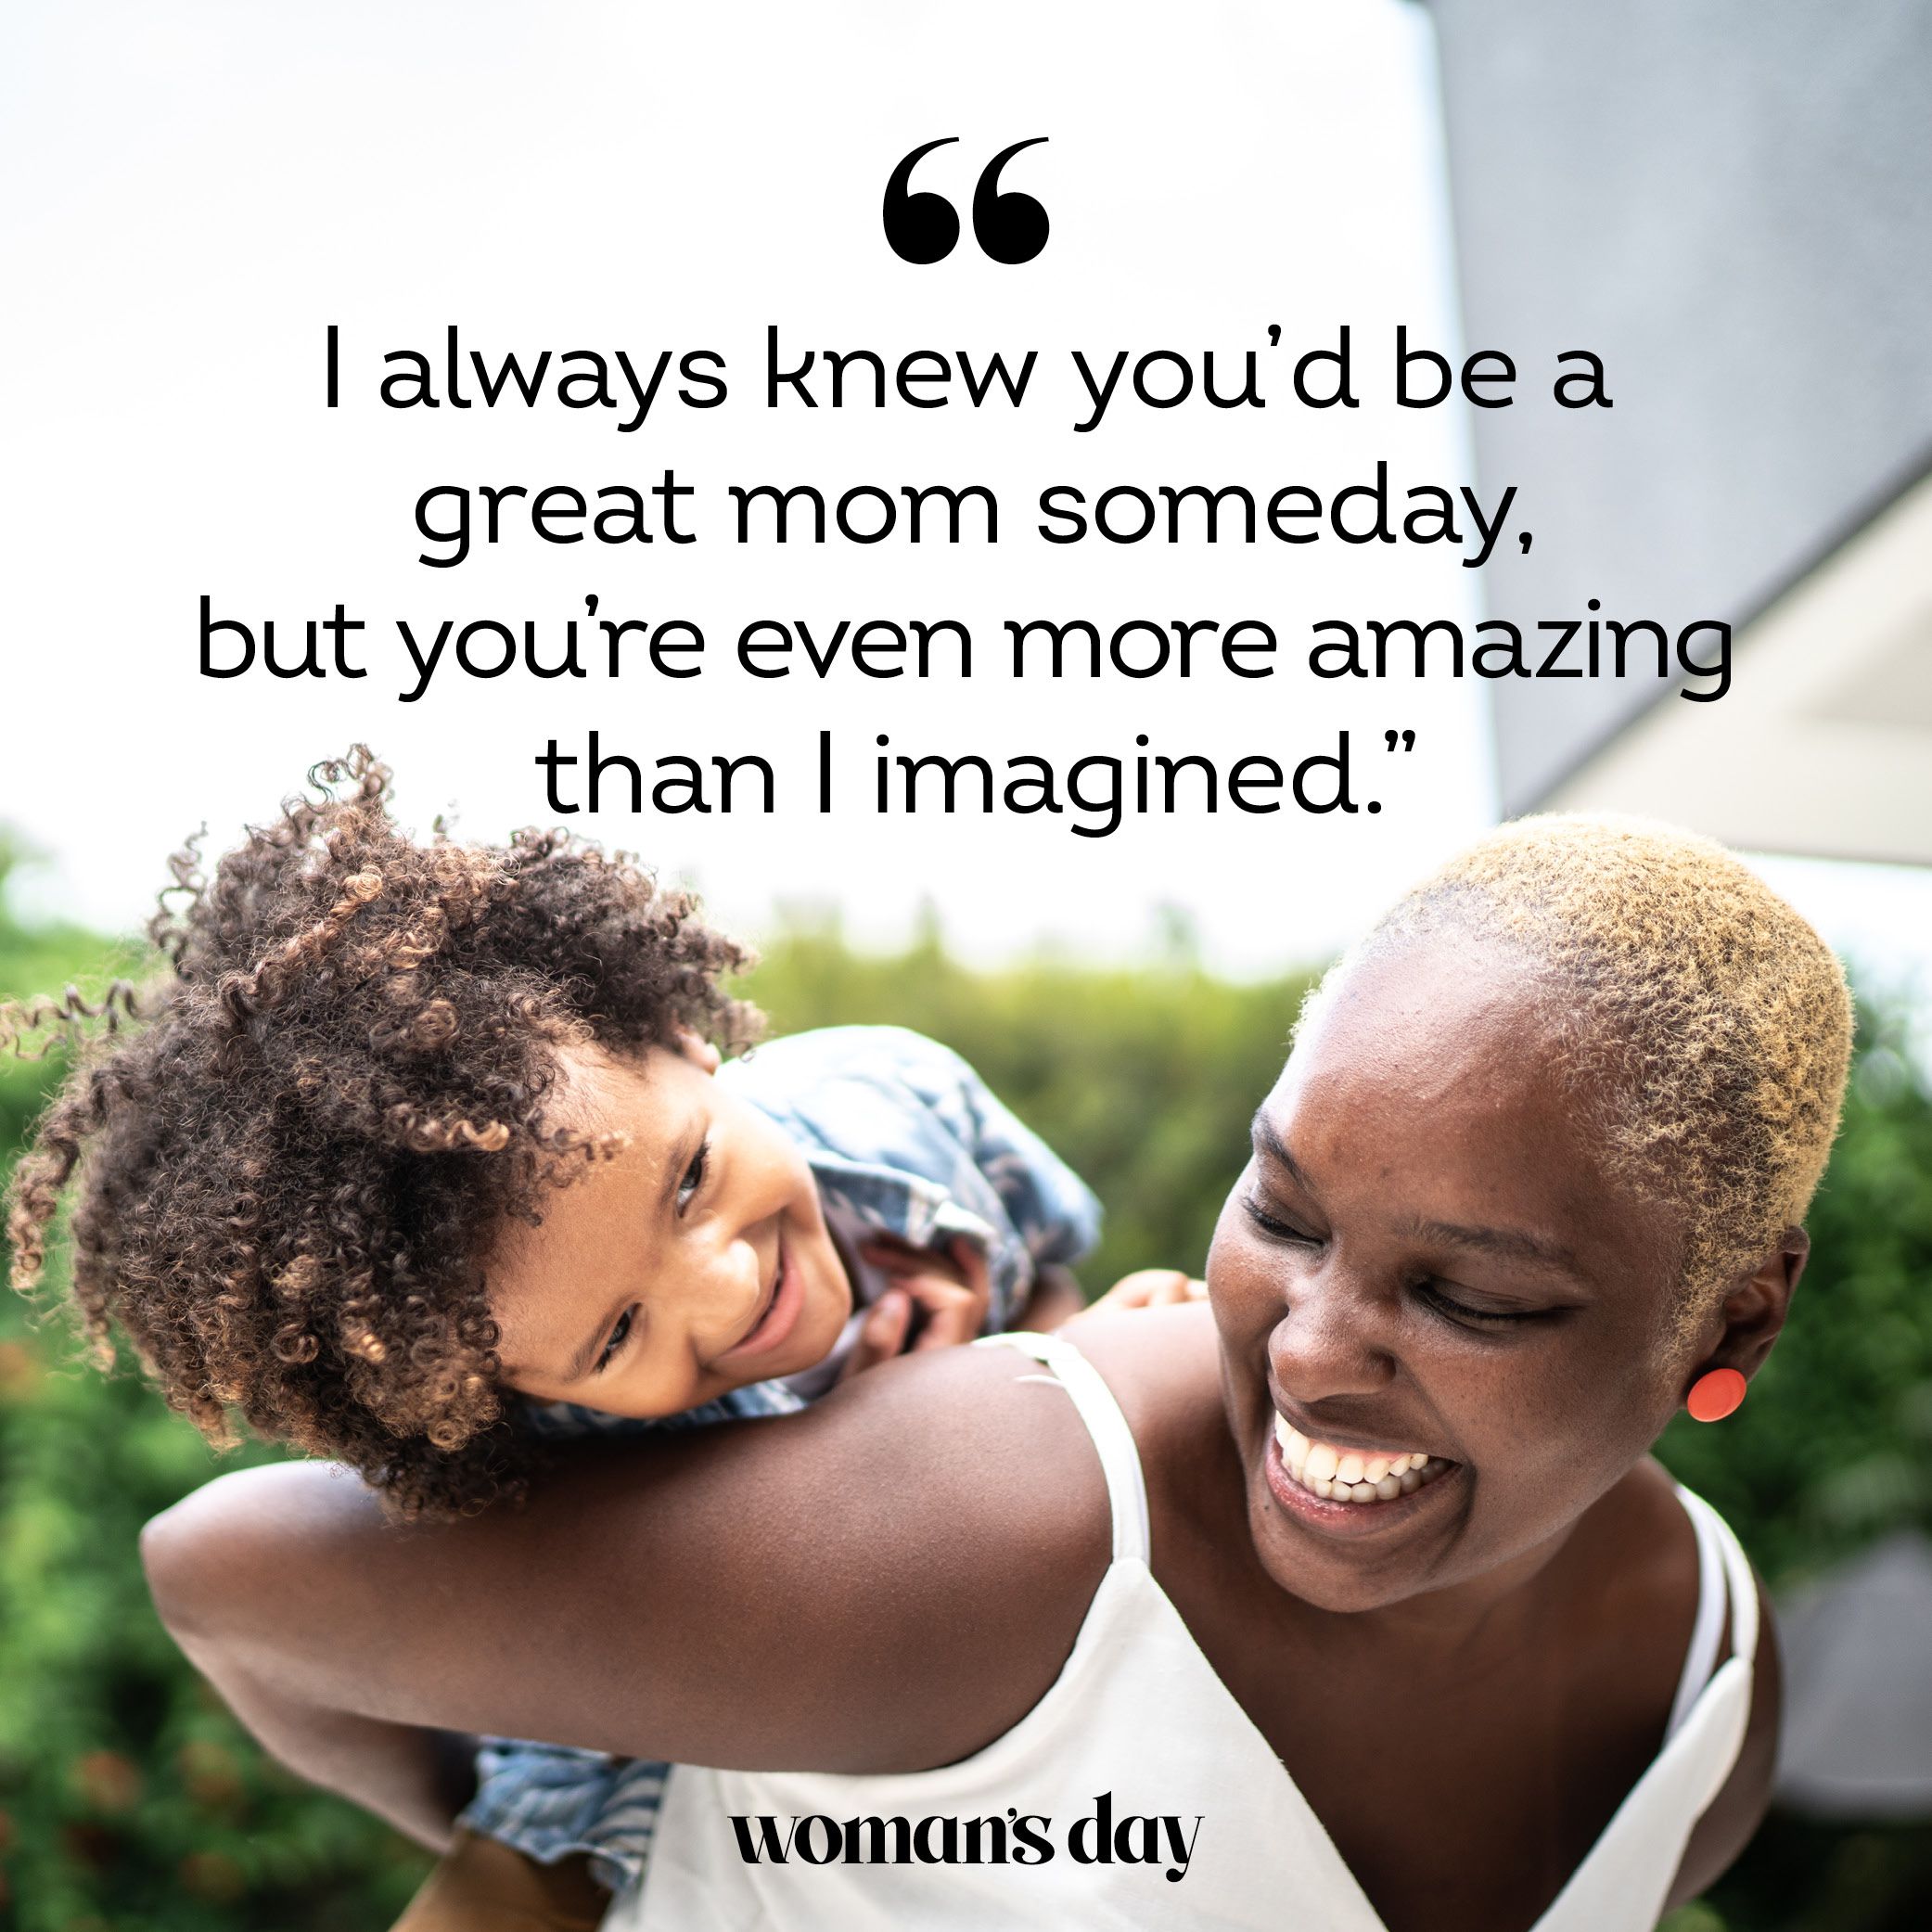 Over 70 Mothers Day Messages For Cards - Cardology